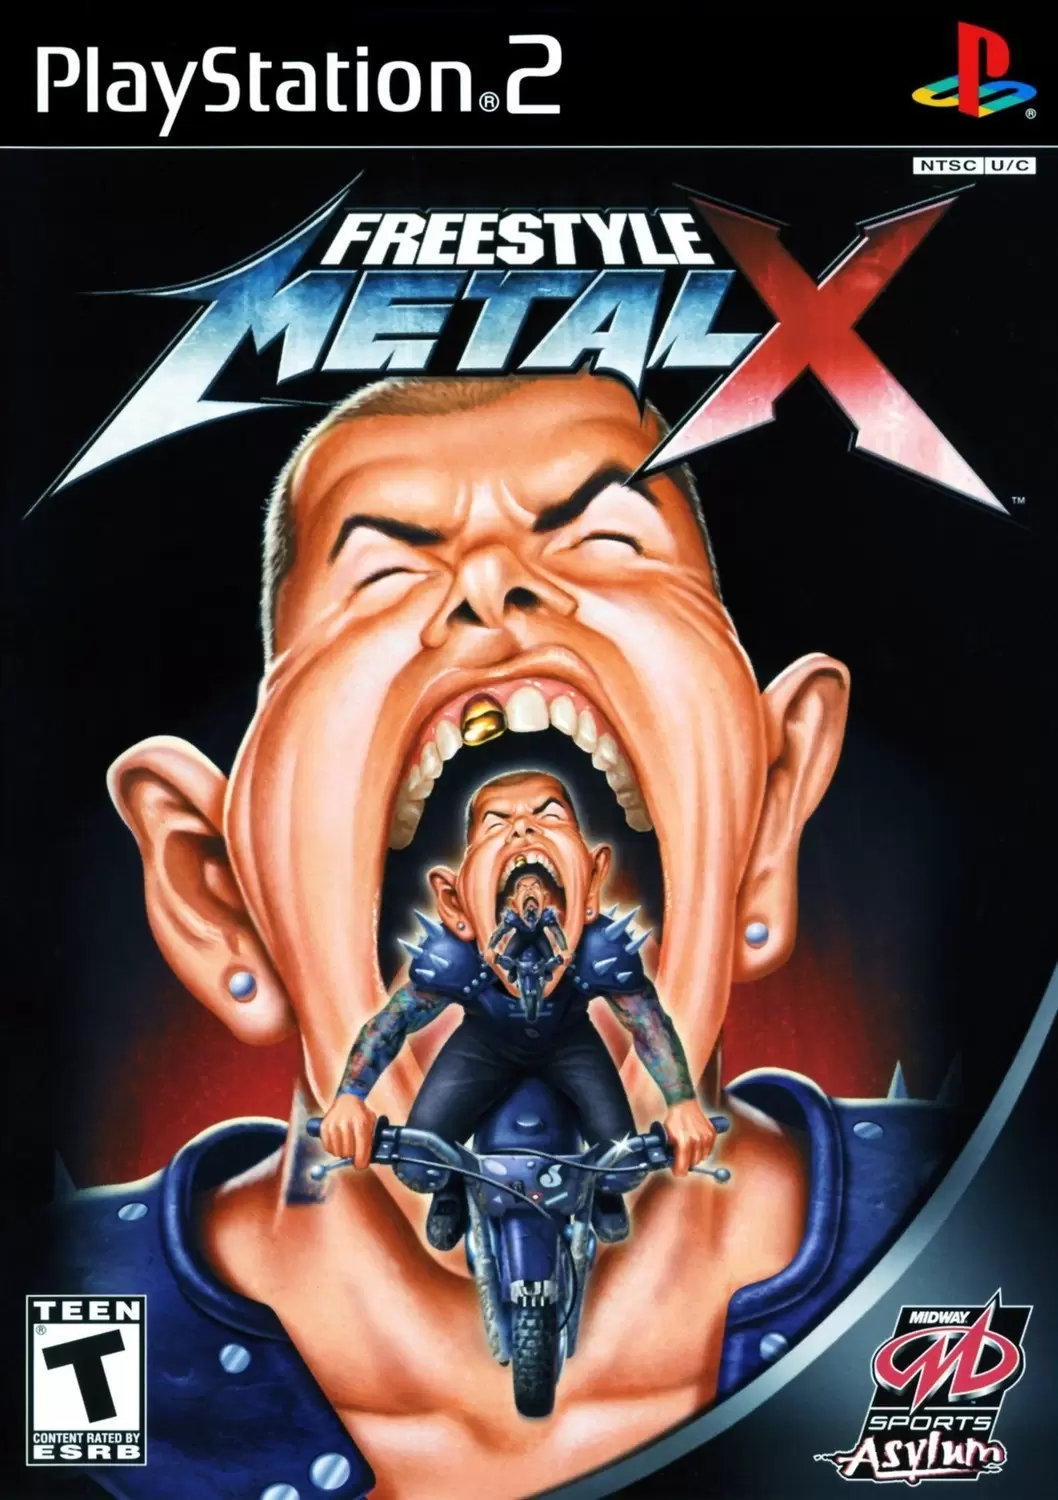 PS2 Games - Freestyle MetalX